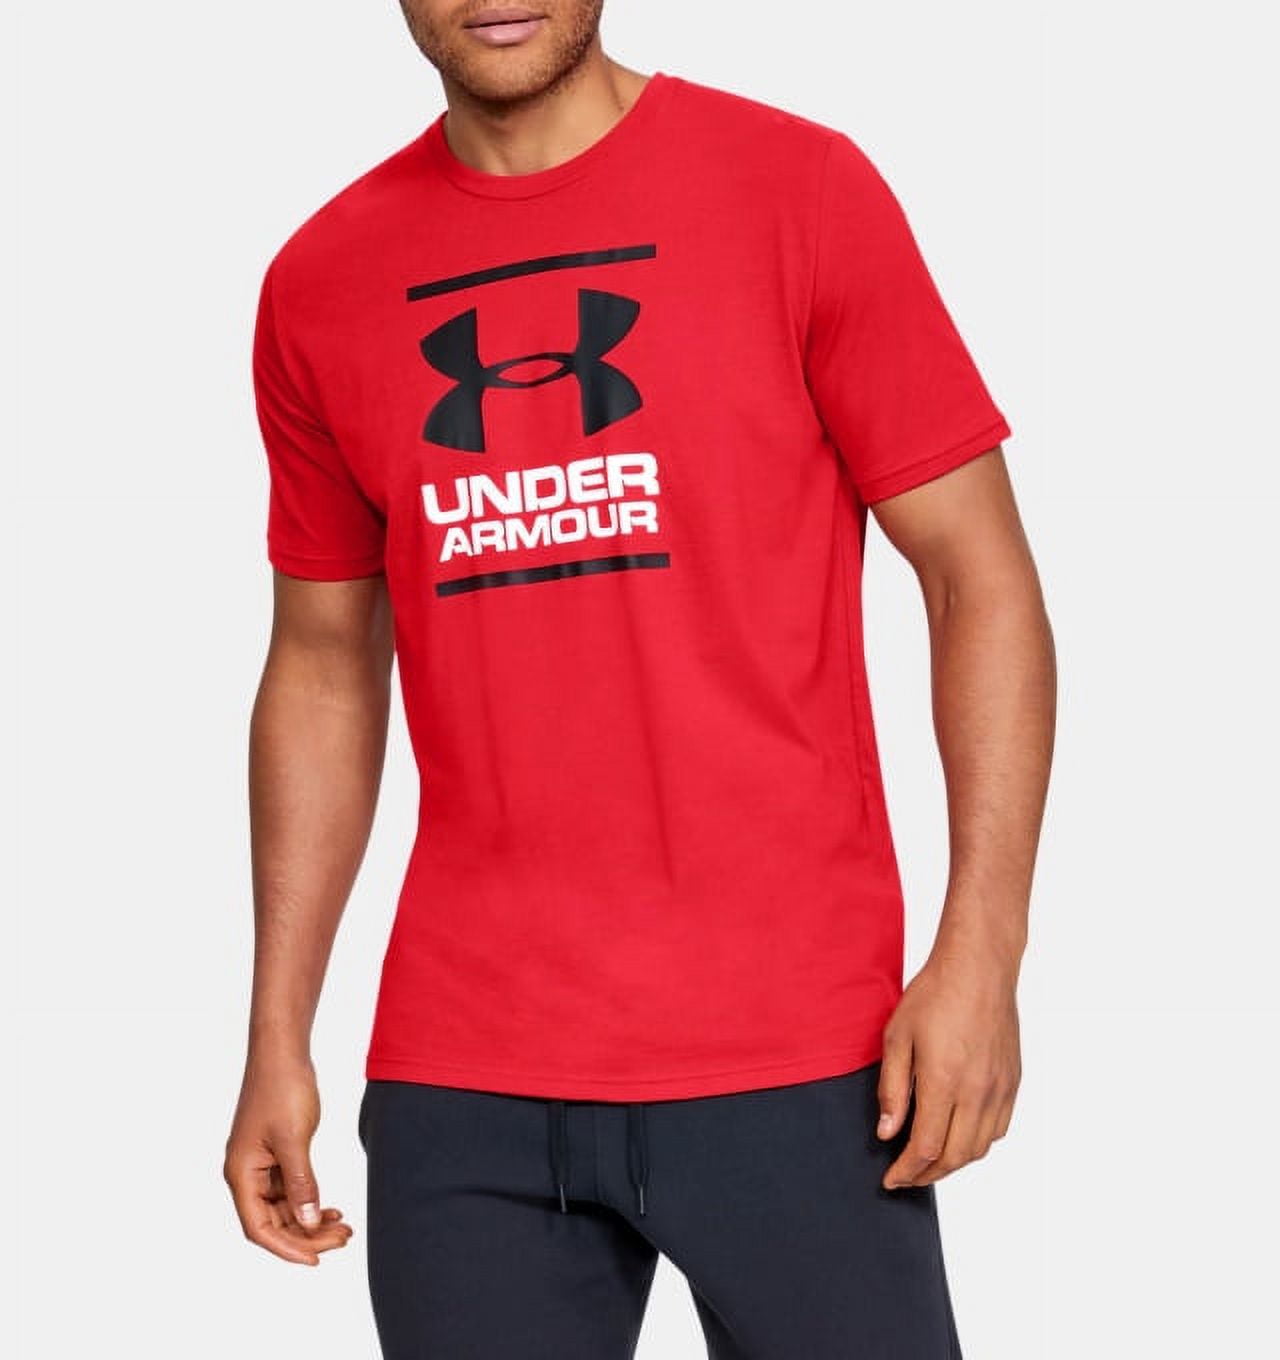 Under Armour 1326849602LG GL Foundation Red Size LG Mens Athletic T-Shirt